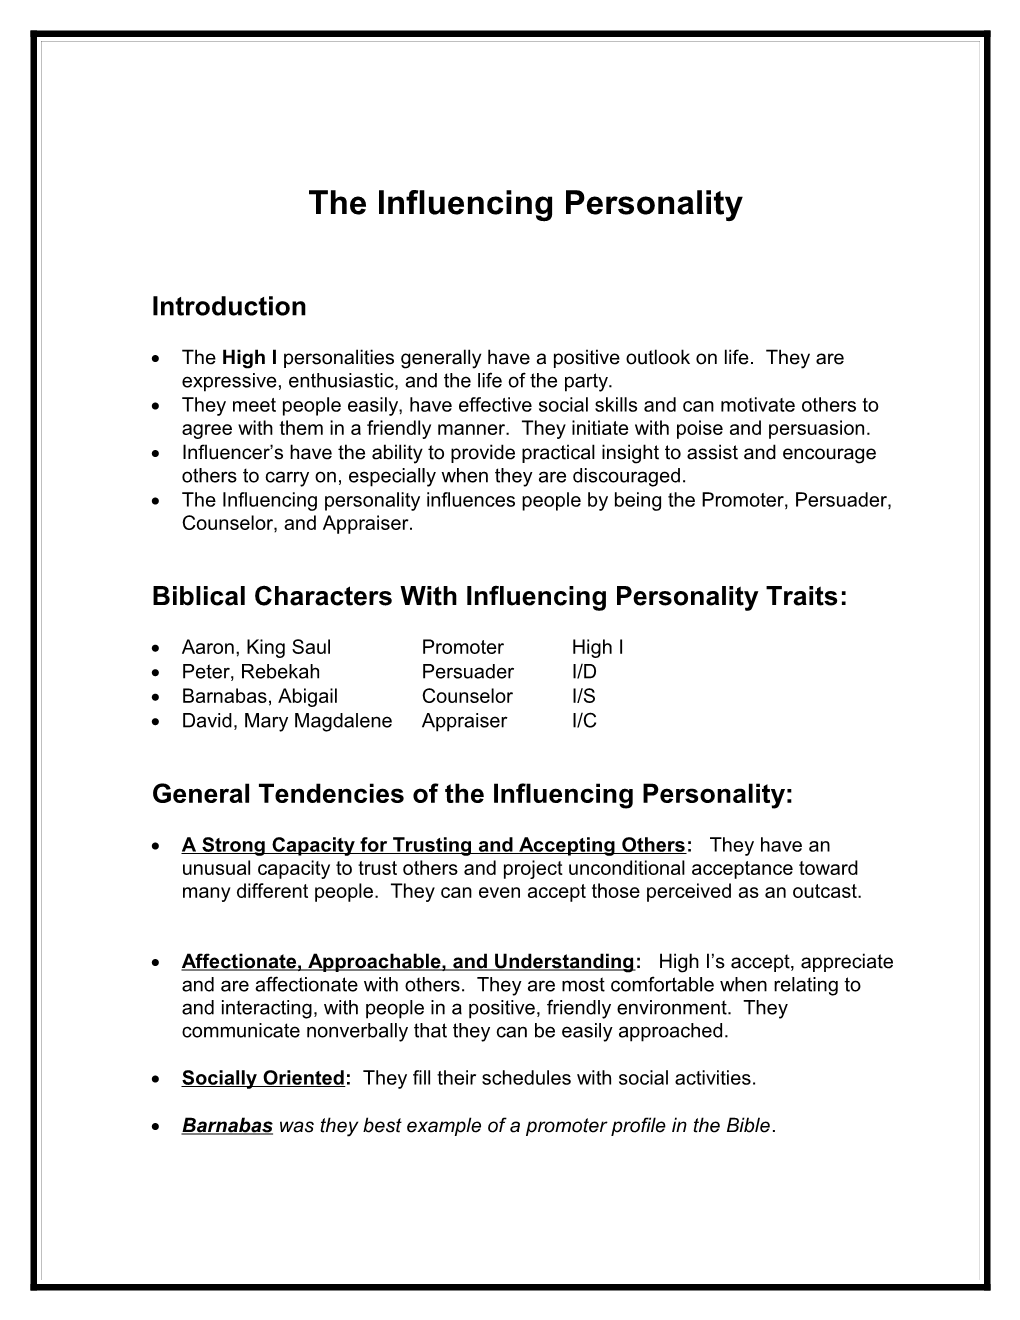 The Influencing Personality